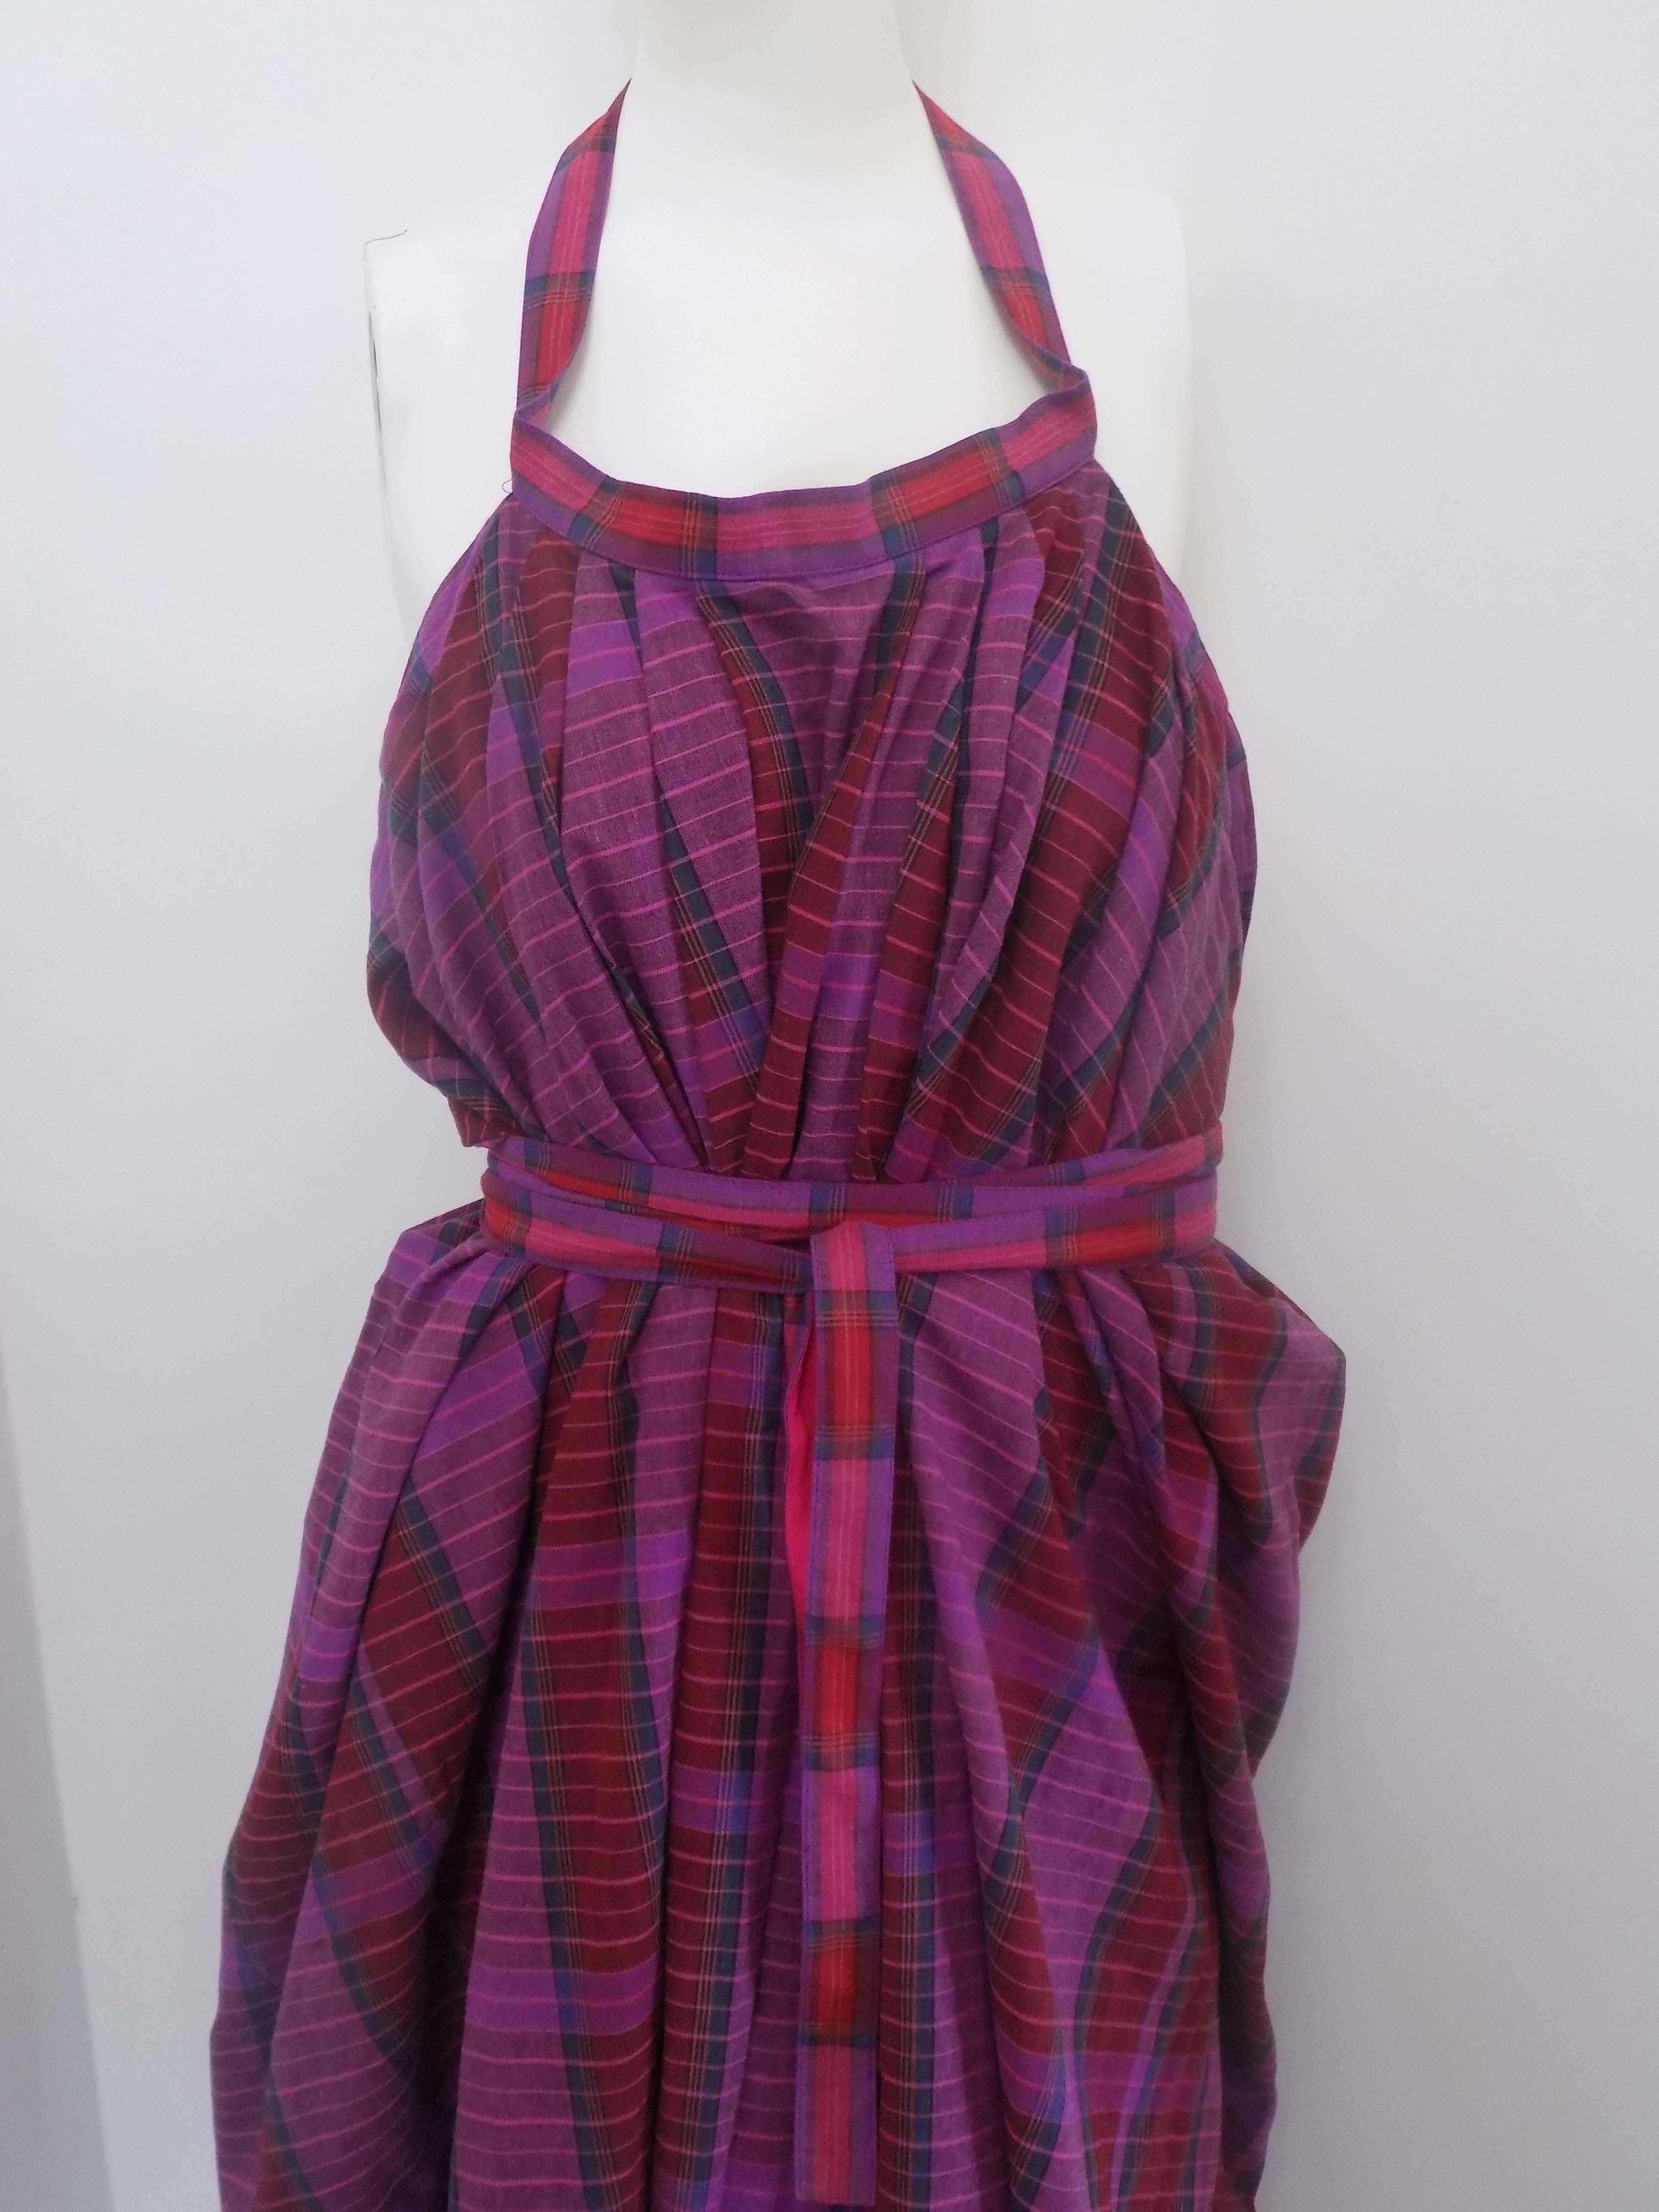 1980 Kenzo Purple Dress

Can be easily used as a skirt

Totally made in France 

100% cotton

Size: 40